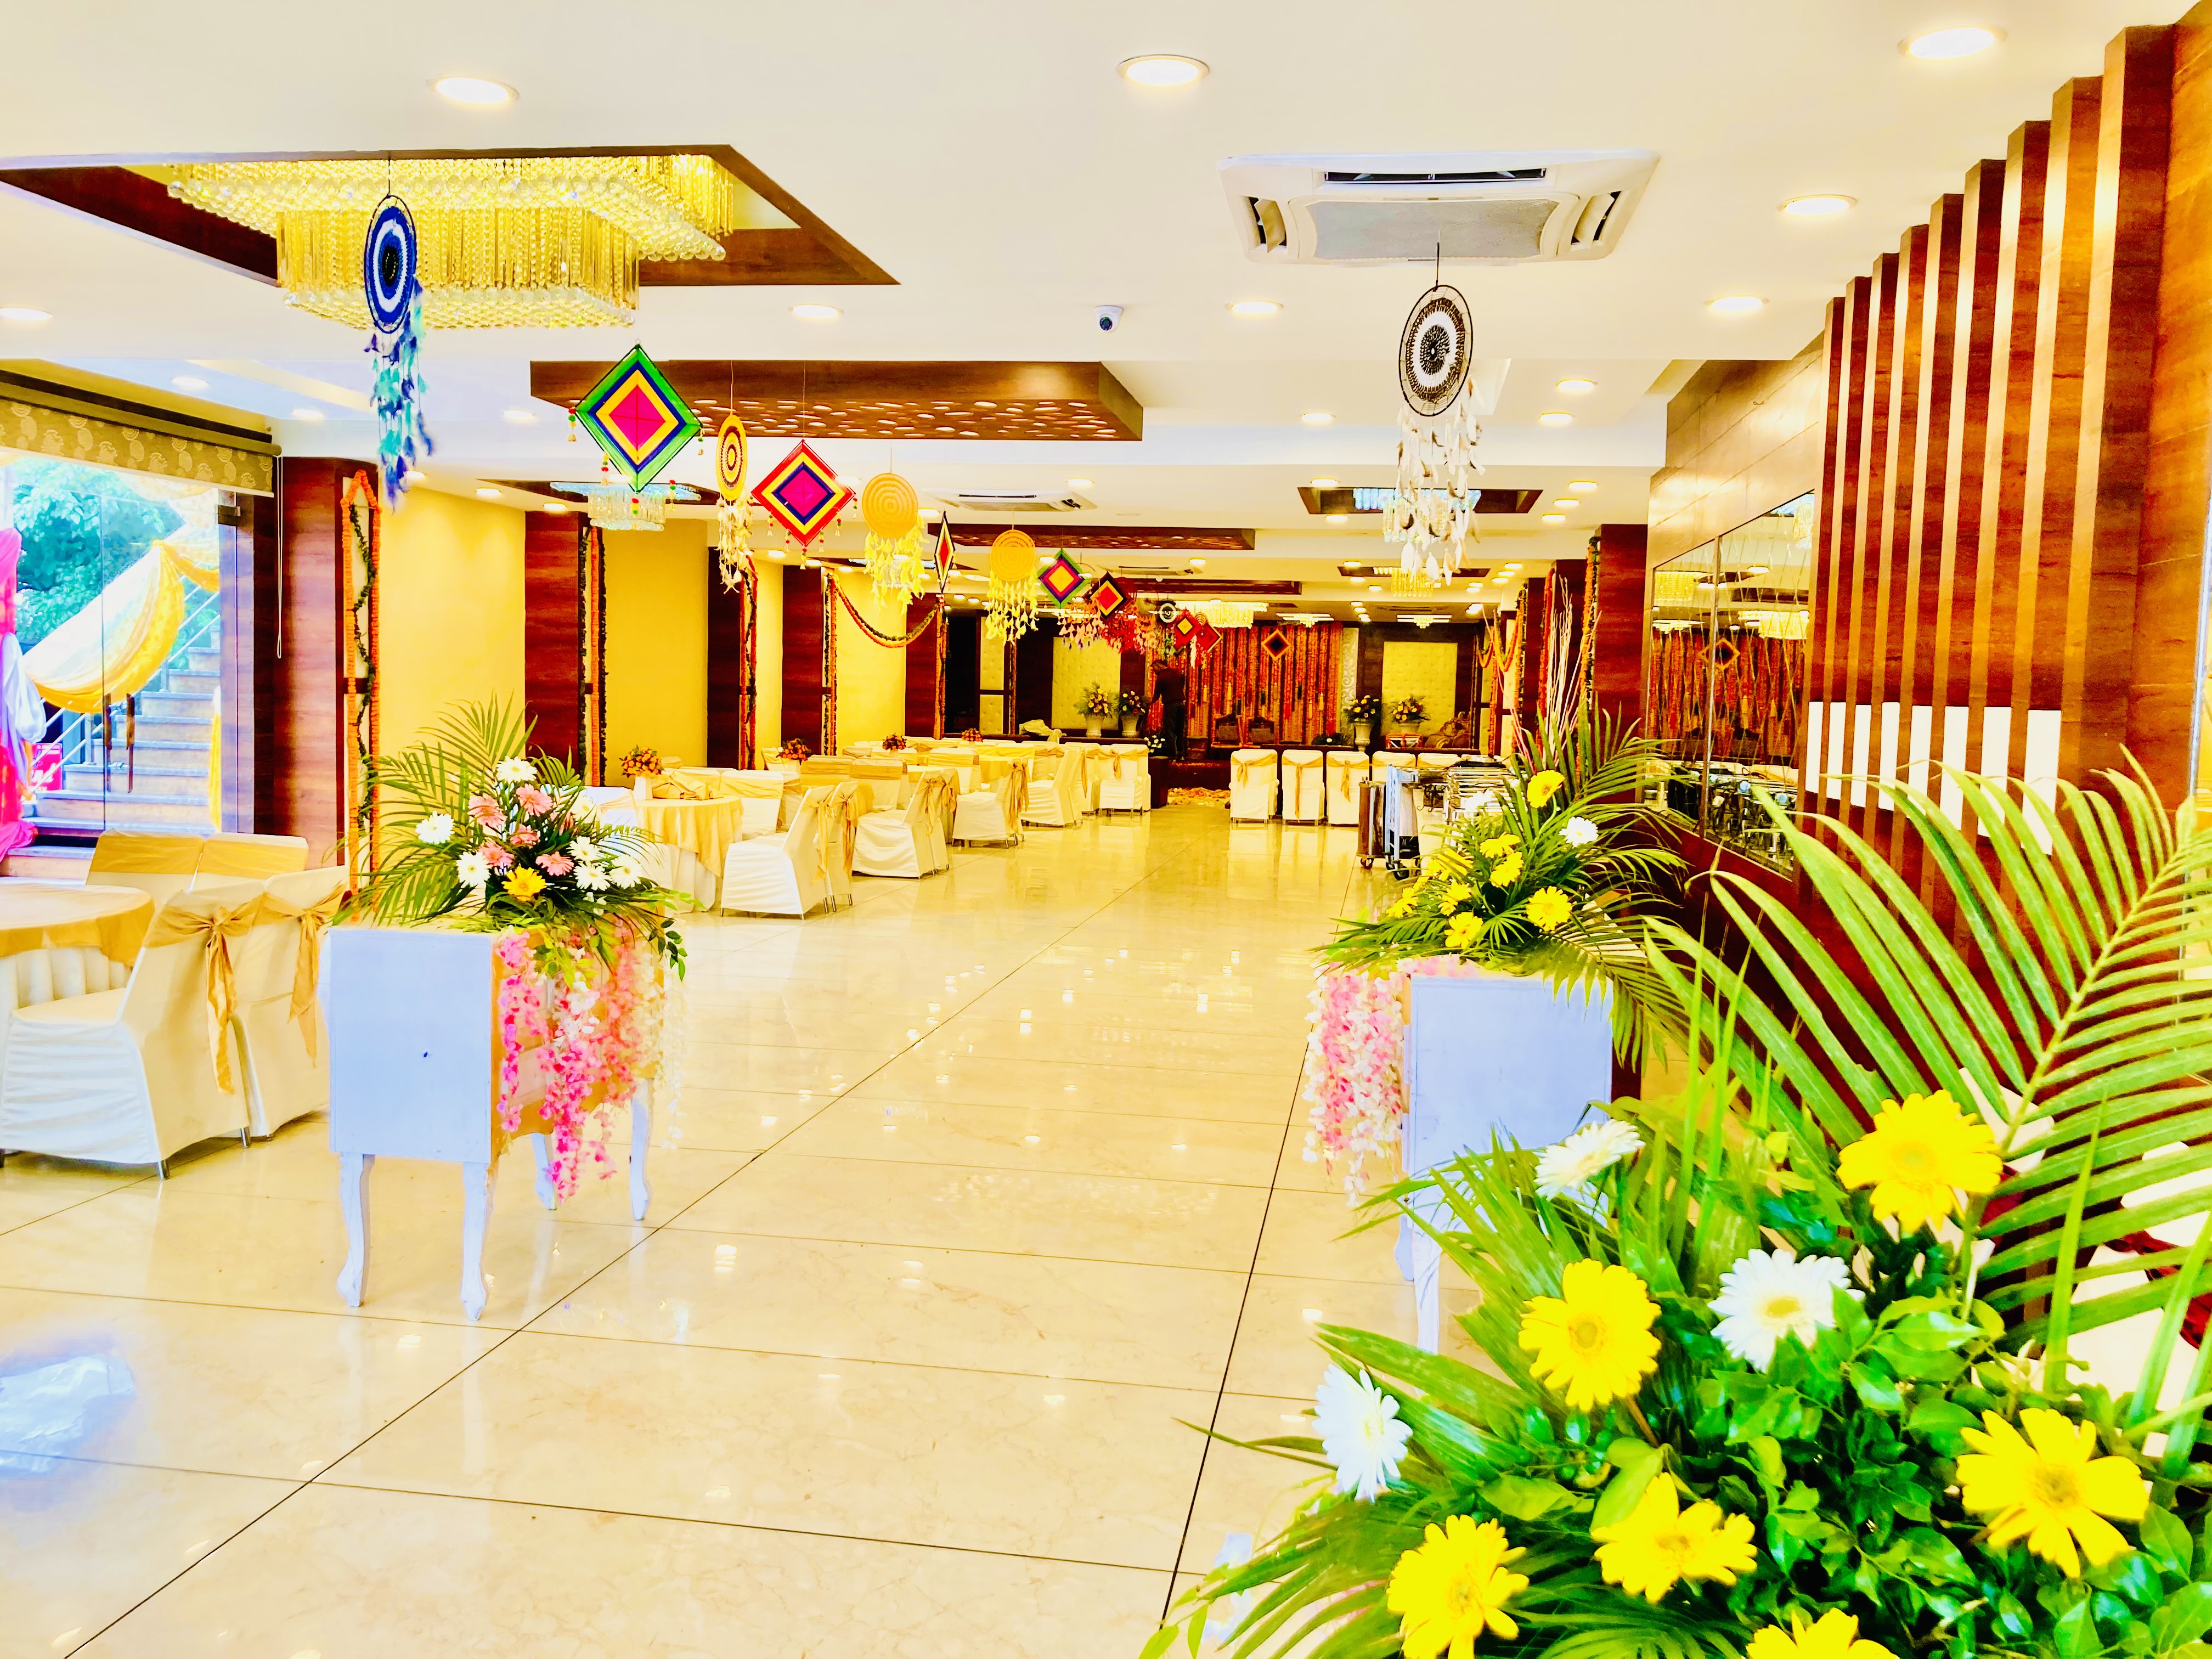 Hotel The Onix - Banquet Hall View_6